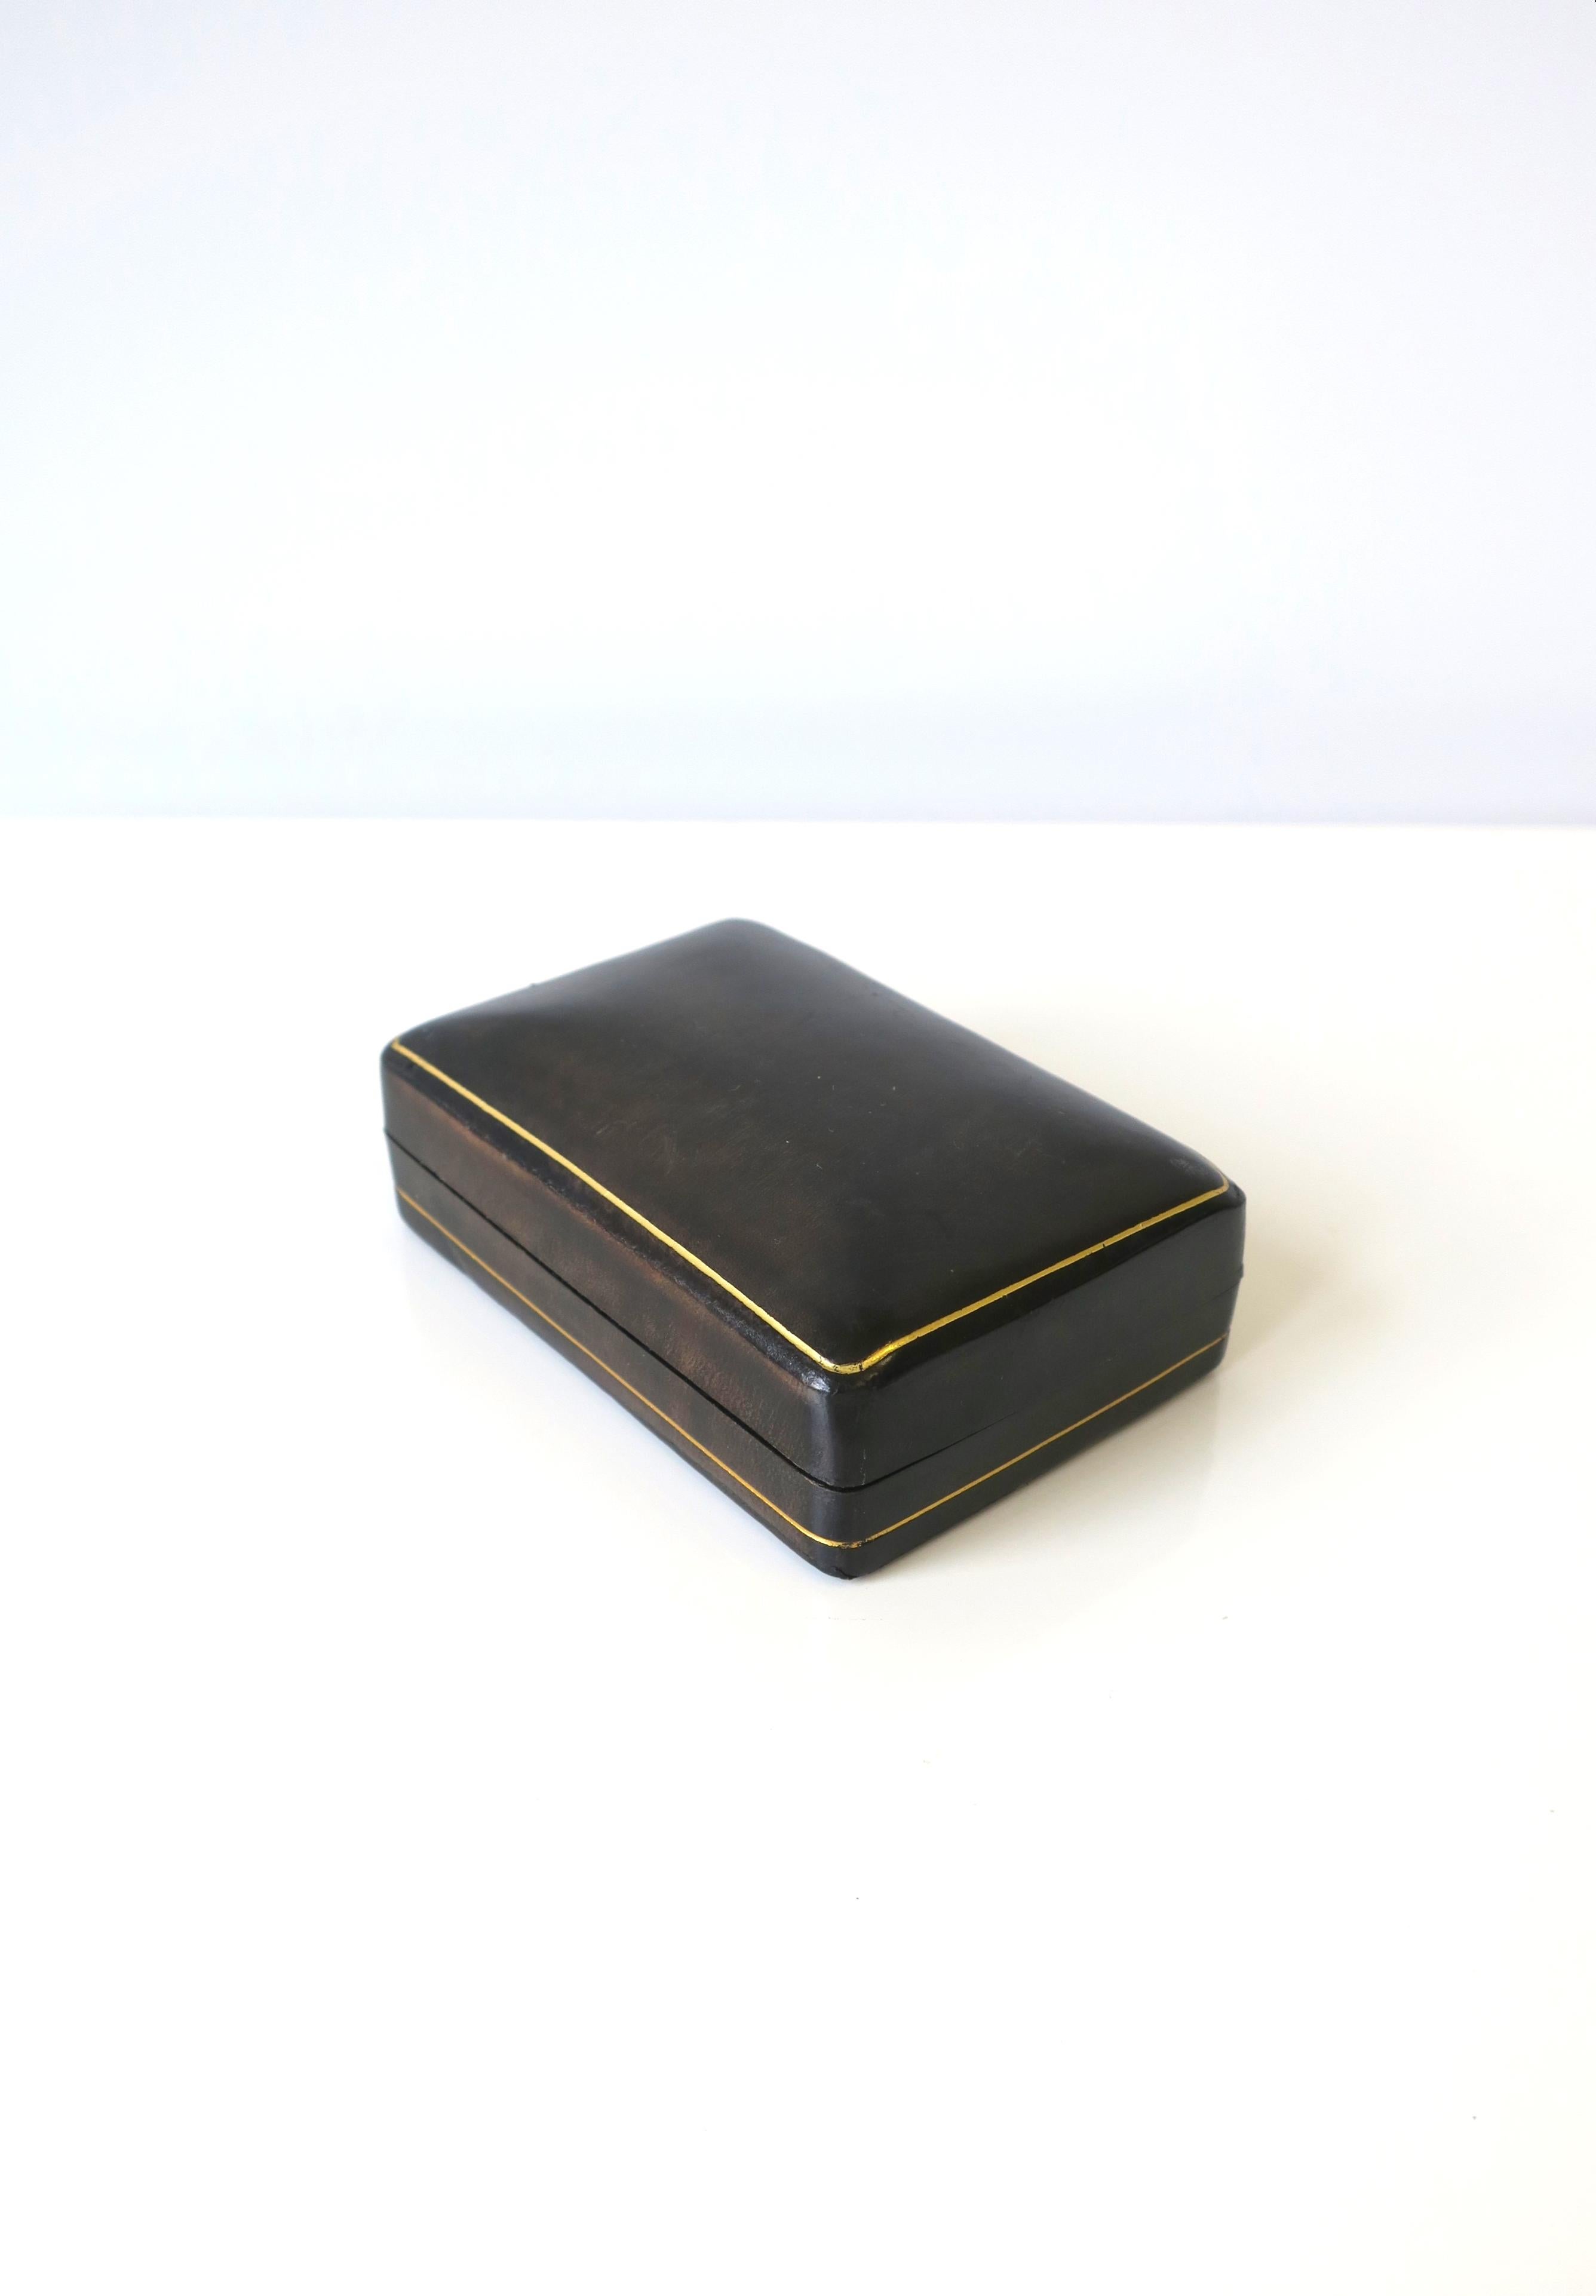 A very beautiful vintage Italian all leather jewelry box in dark grey charcoal with gold embossing, circa mid-20th century, Italy. Marked 